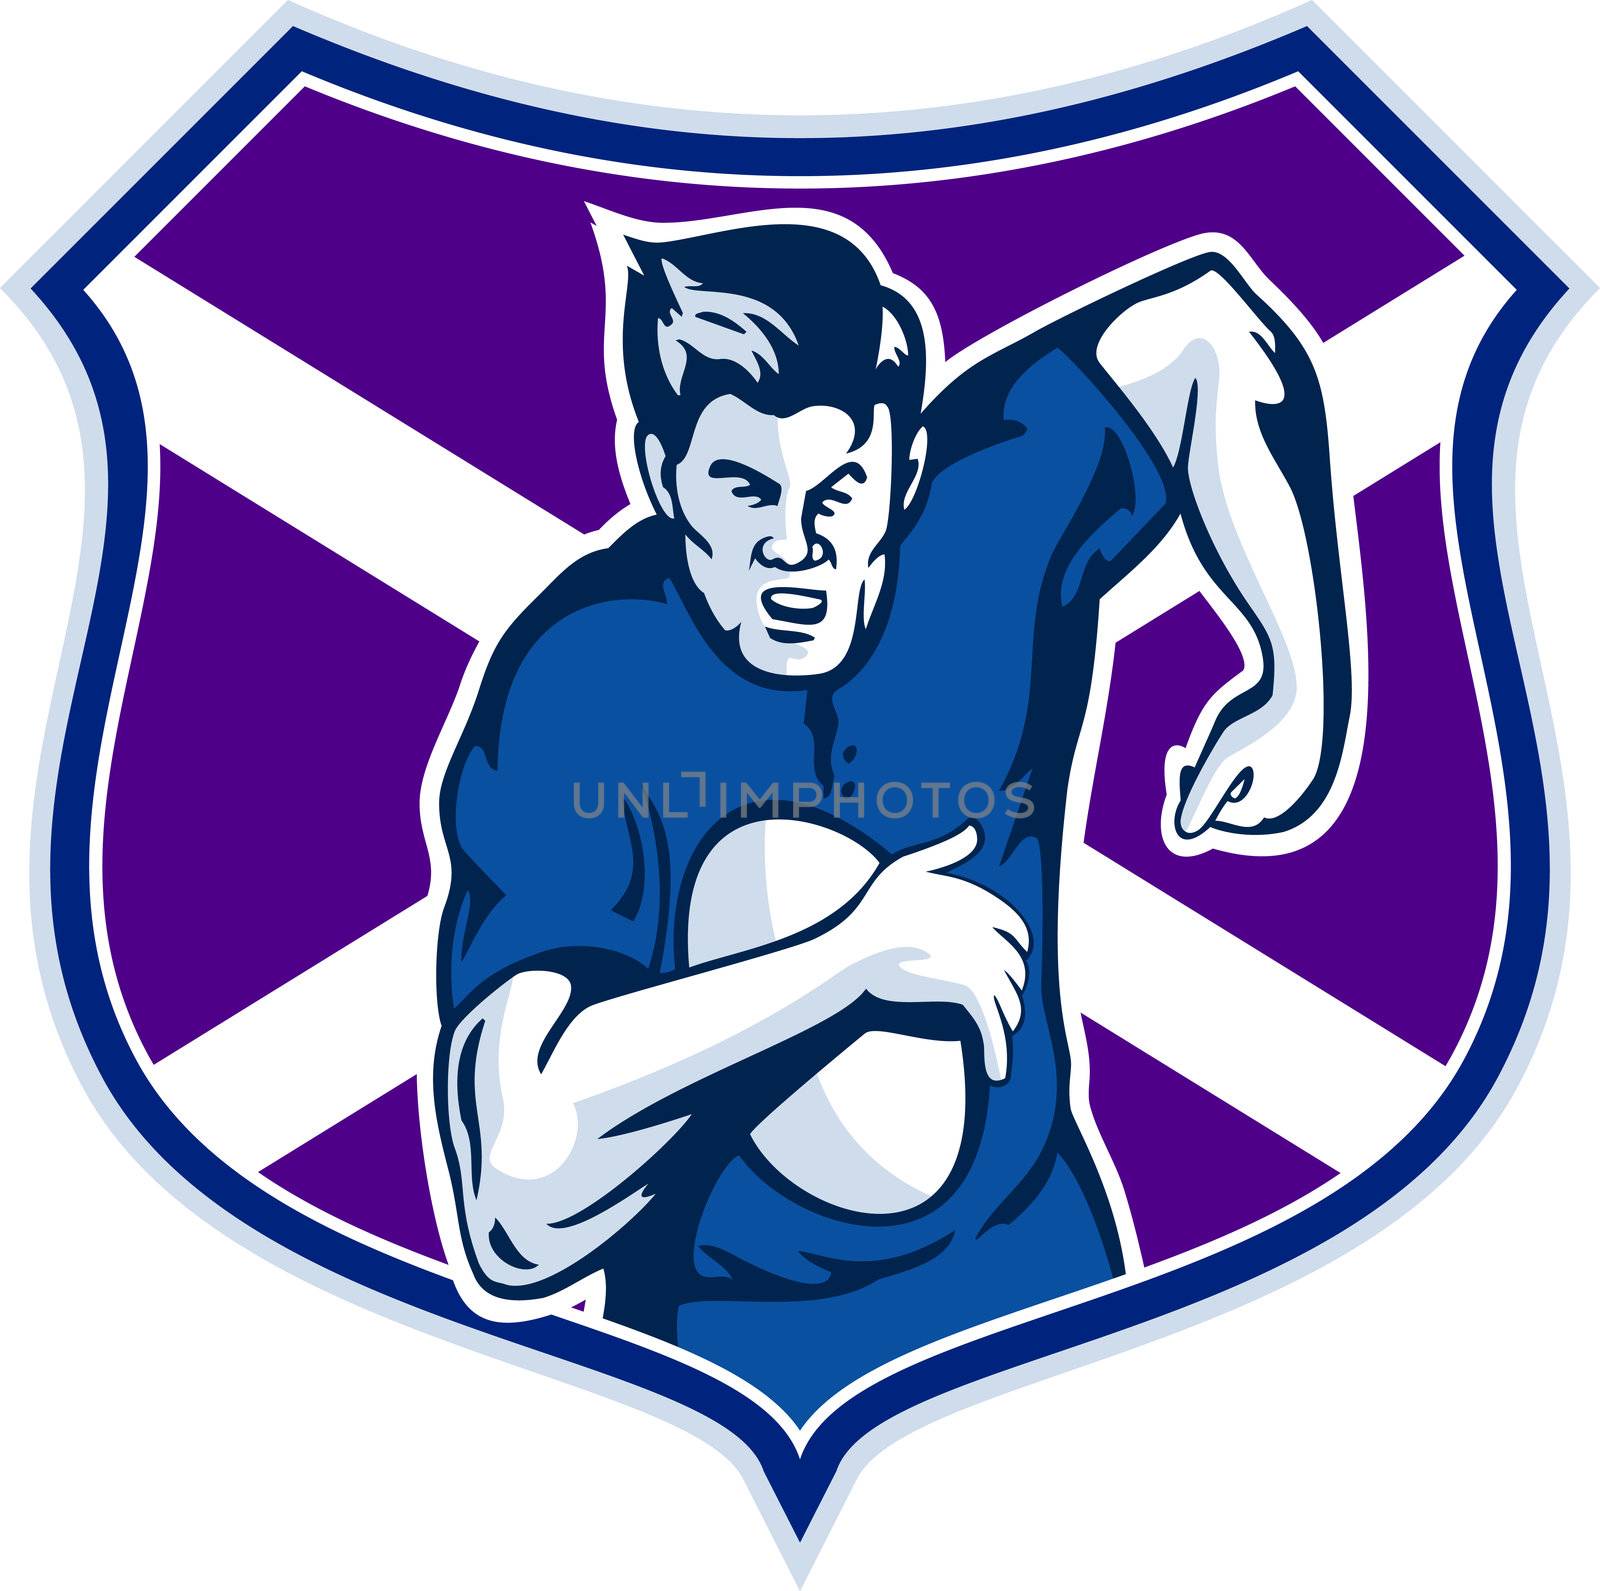 rugby player flag and shield of scotland by patrimonio